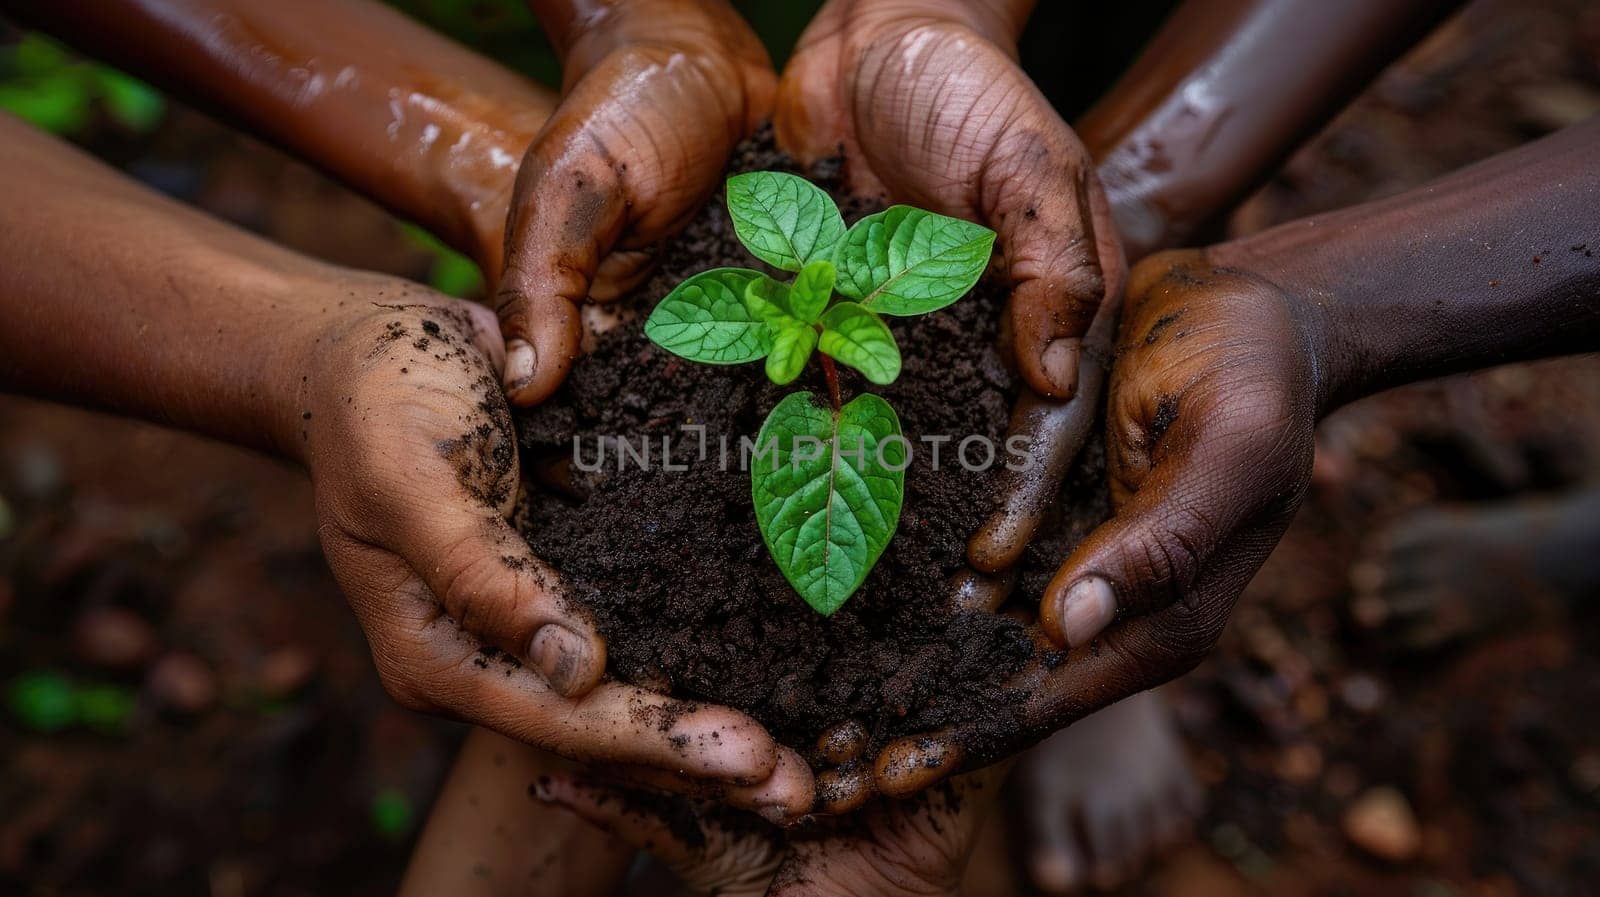 Cultivating Diversity, Close-up of Diverse Hands Holding a Small Seedling..